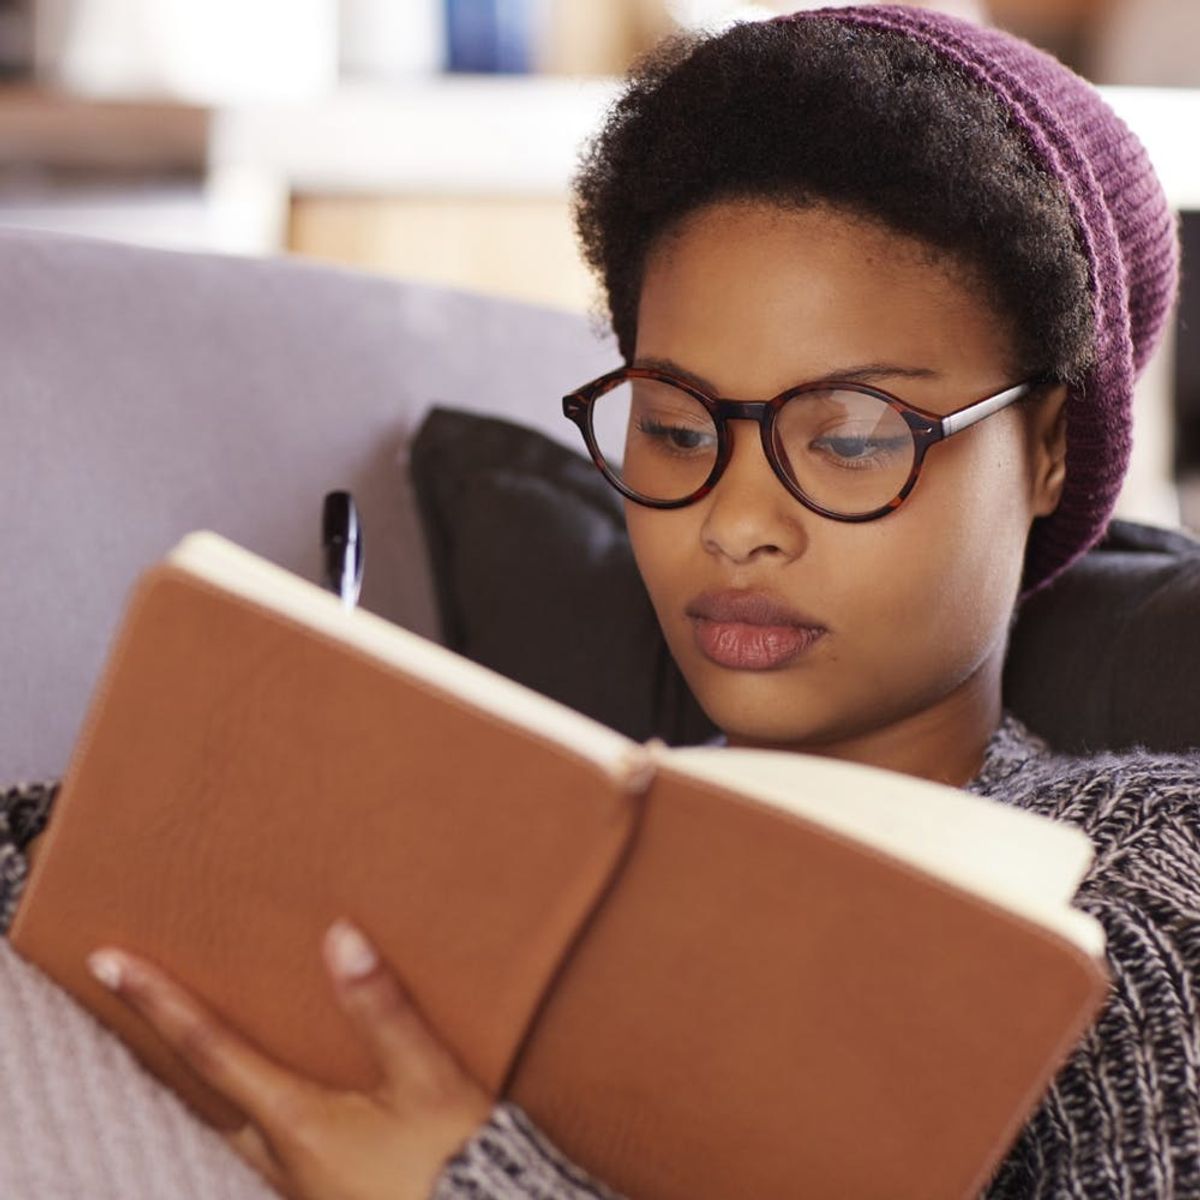 The 3 New Books You *Need* to Add to Your Summer Reading List